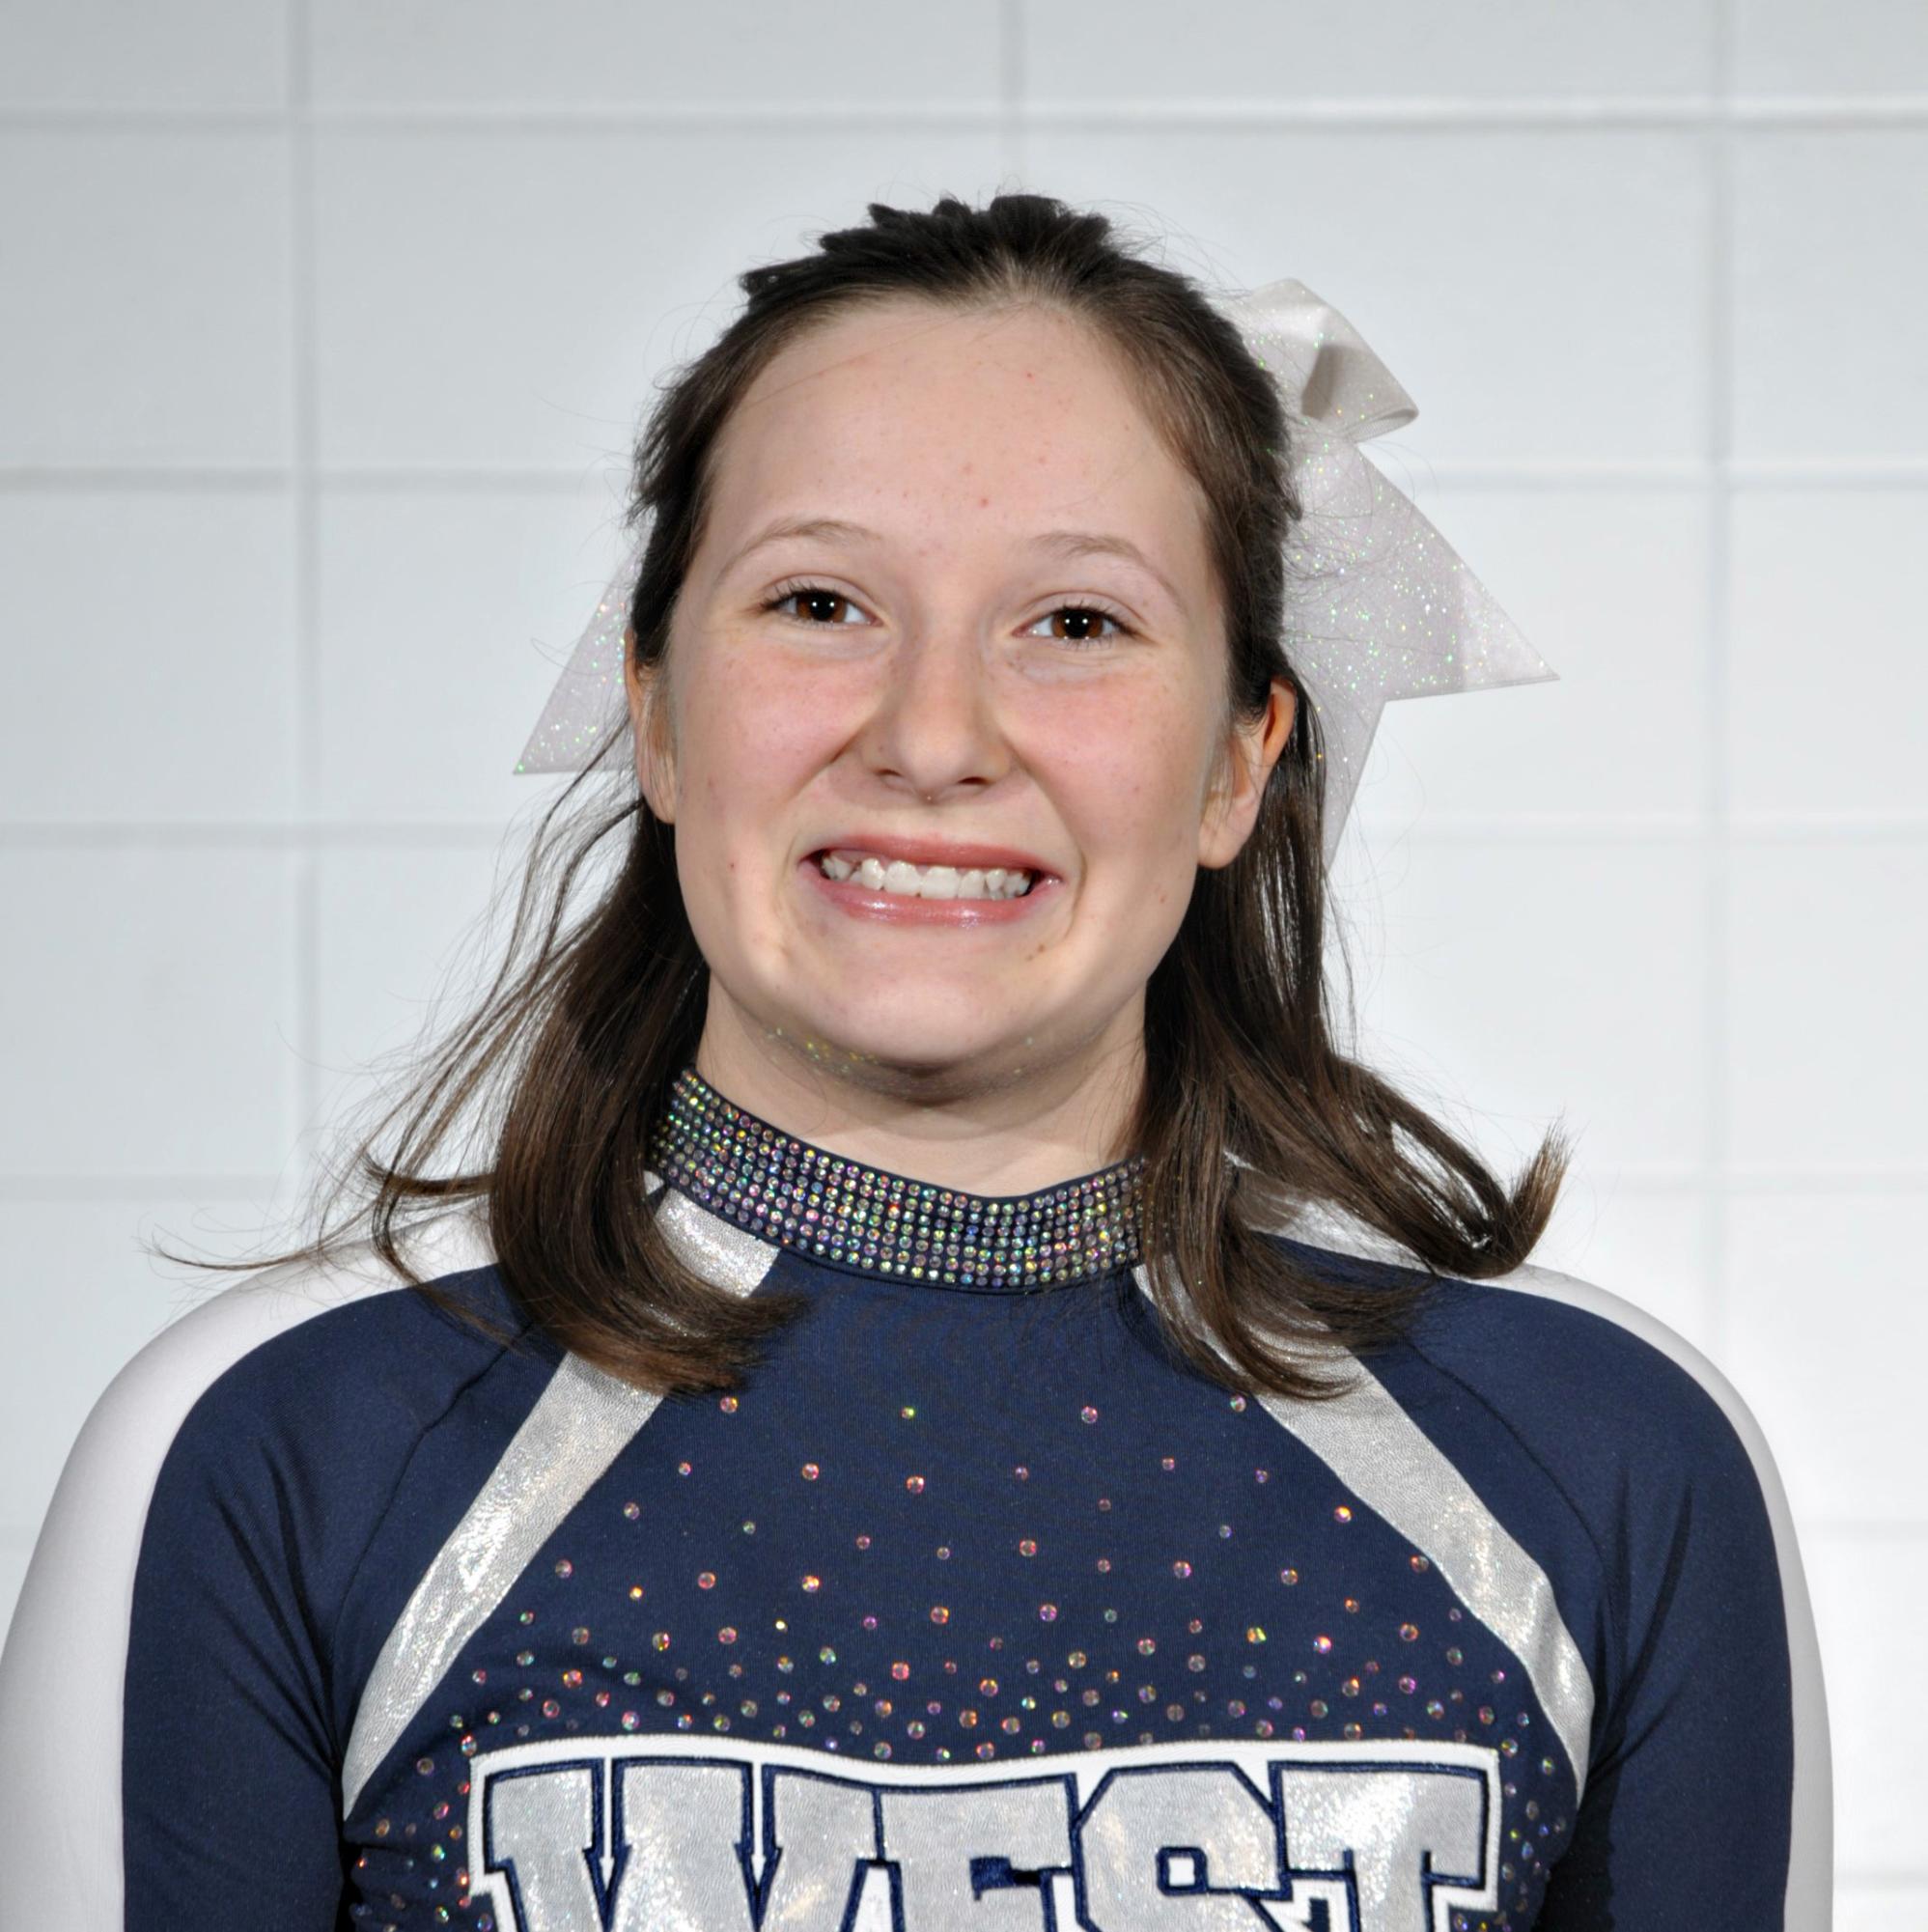 Amelia Hudson has found this season of cheer to be fun, despite an injury that placed her on the sideline. (Photo courtesy of Lifetouch)